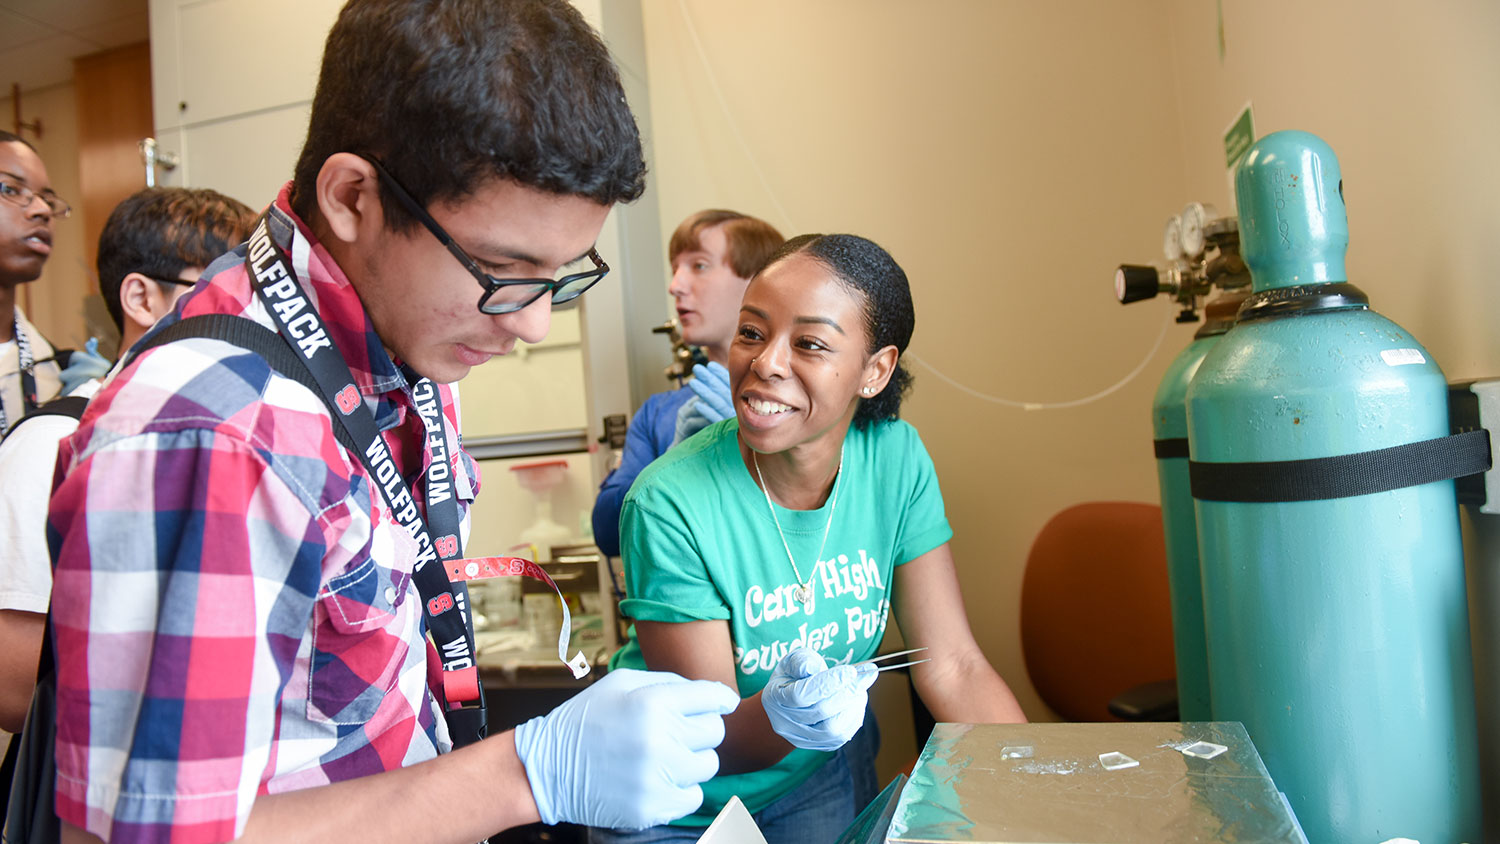 High school students with visual impairments or blindness attended a 2016 summer camp at NC State's Engineering Place.